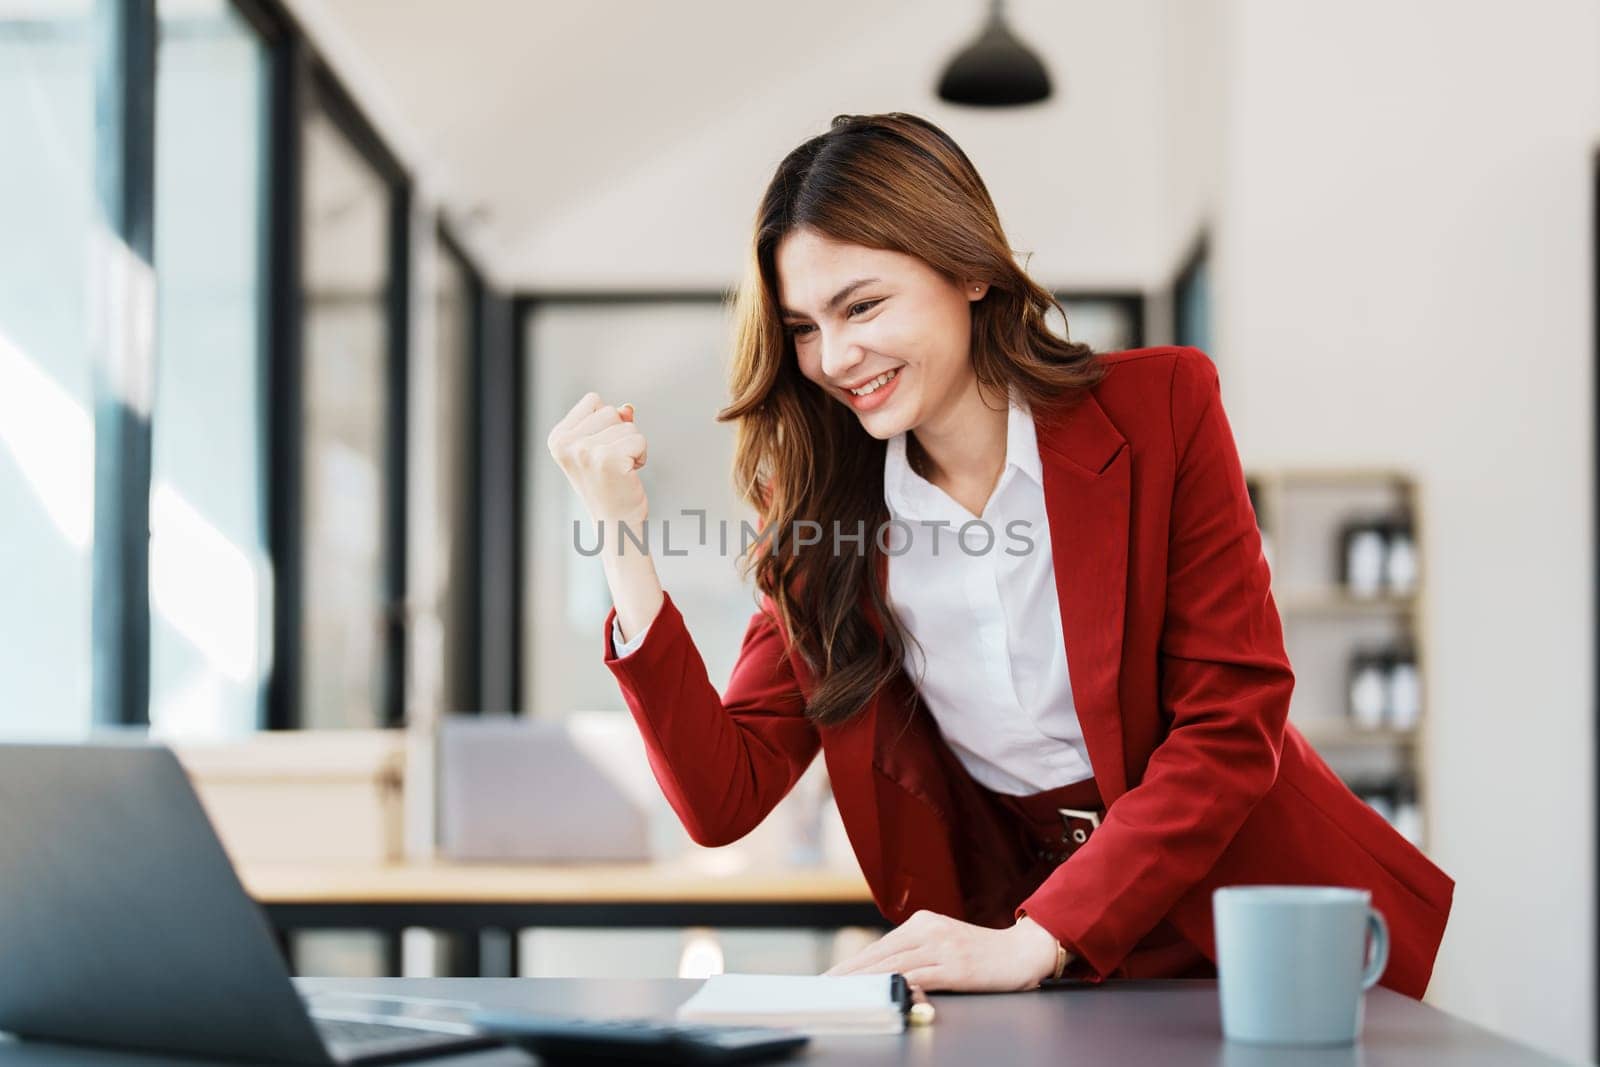 Beautiful young teen asian businesswomen using computer laptop with hands up in winner is gesture, Happy to be successful celebrating achievement success.